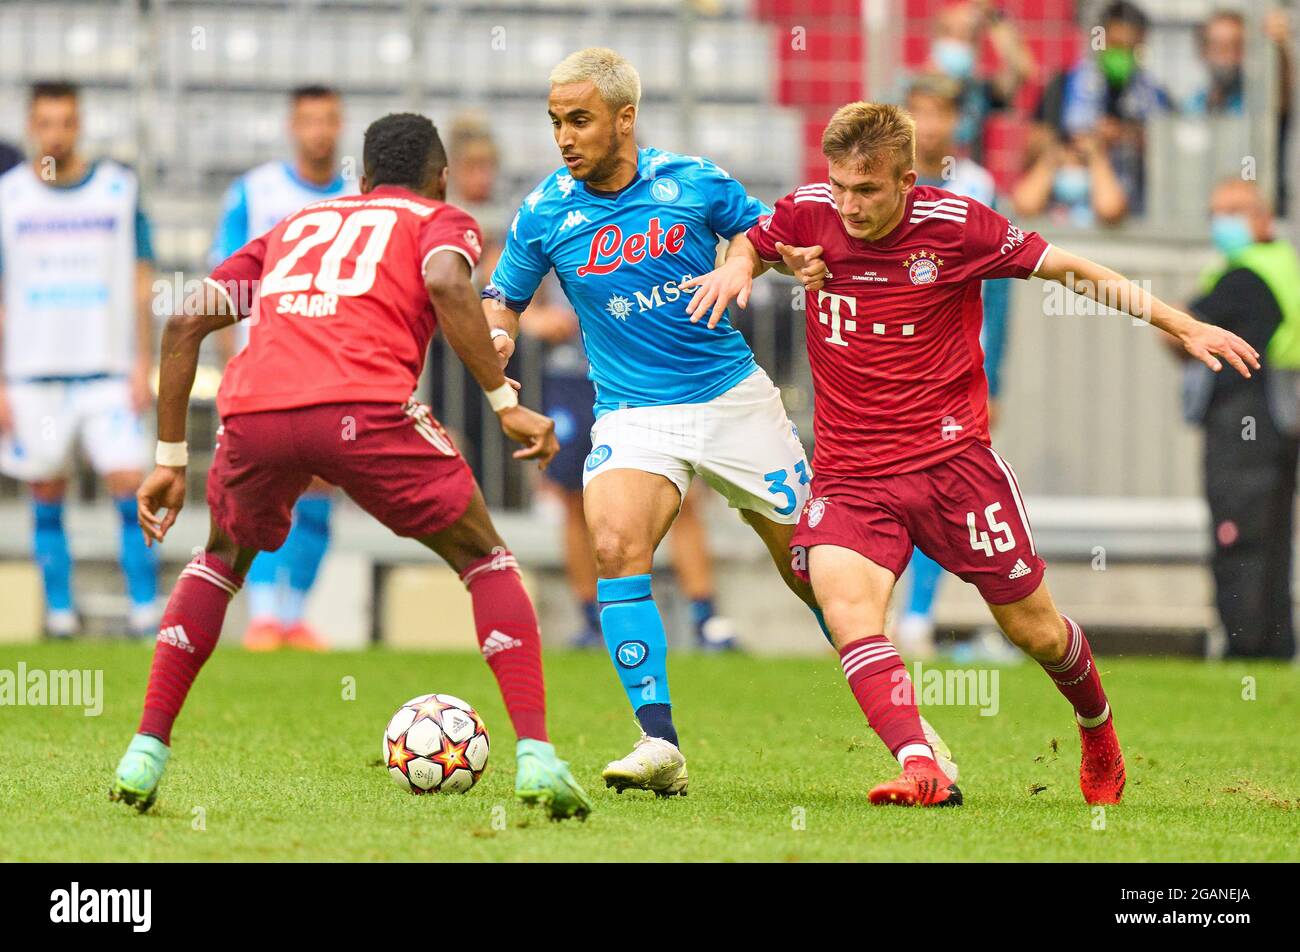 Torben Rhein, FCB 45  compete for the ball, tackling, duel, header, zweikampf, action, fight against Faouzi GHOULAM,SSC 31  in the match FC BAYERN MUENCHEN - SSC NEAPEL 0-3 at the Audi Football Summit on July 31, 2021 in Munich, Germany  Season 2021/2022, matchday X, 1.Bundesliga, FCB, München, Napoli, X.Spieltag. © Peter Schatz / Alamy Live News Stock Photo